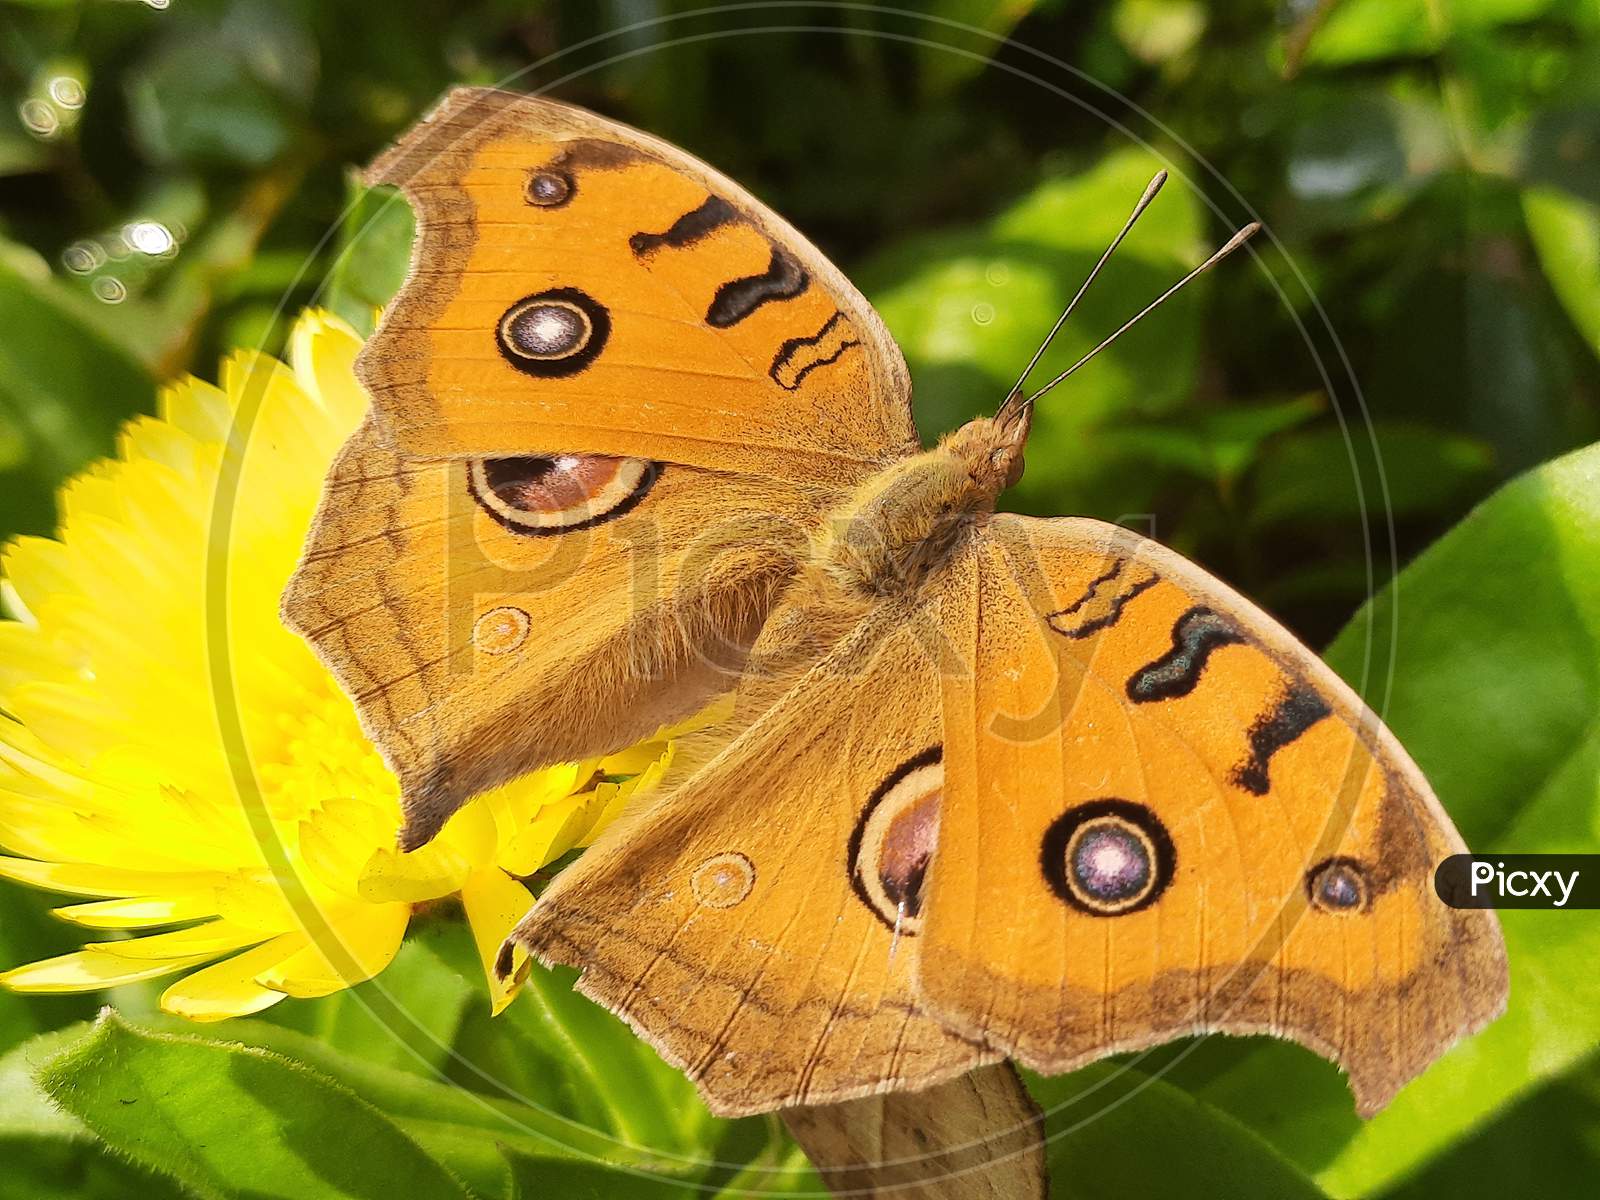 How a butterfly is sucking juice from a flower